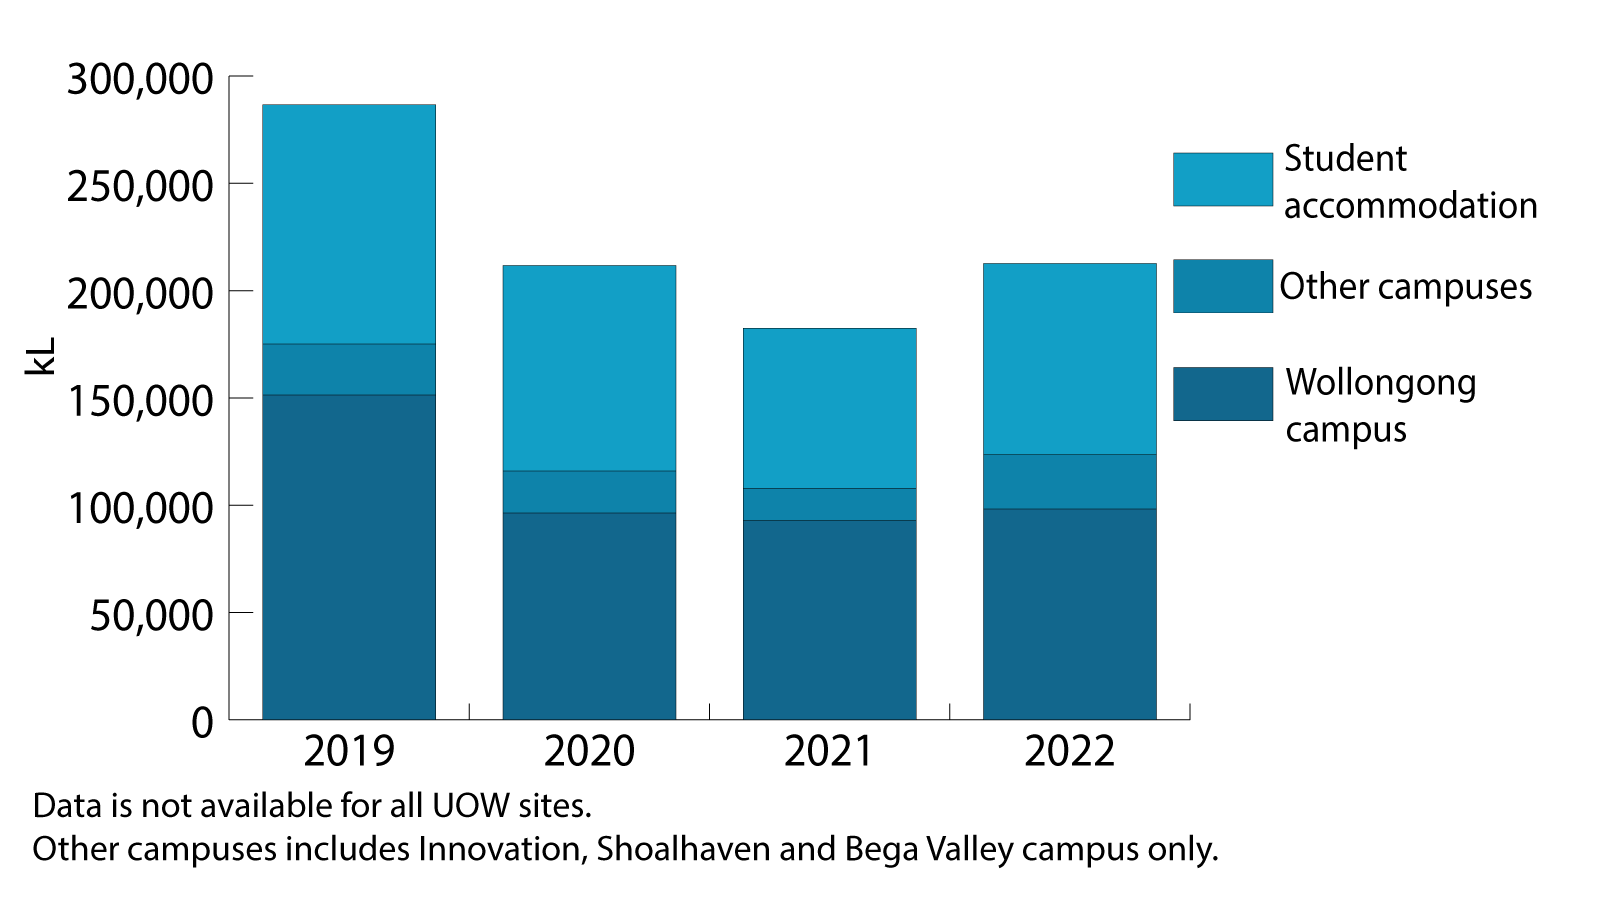 This graph shows the yearly water consumption for Wollongong, Innovation, Bega and Shoalhaven campus and Student accommodation for  2019 to 2022